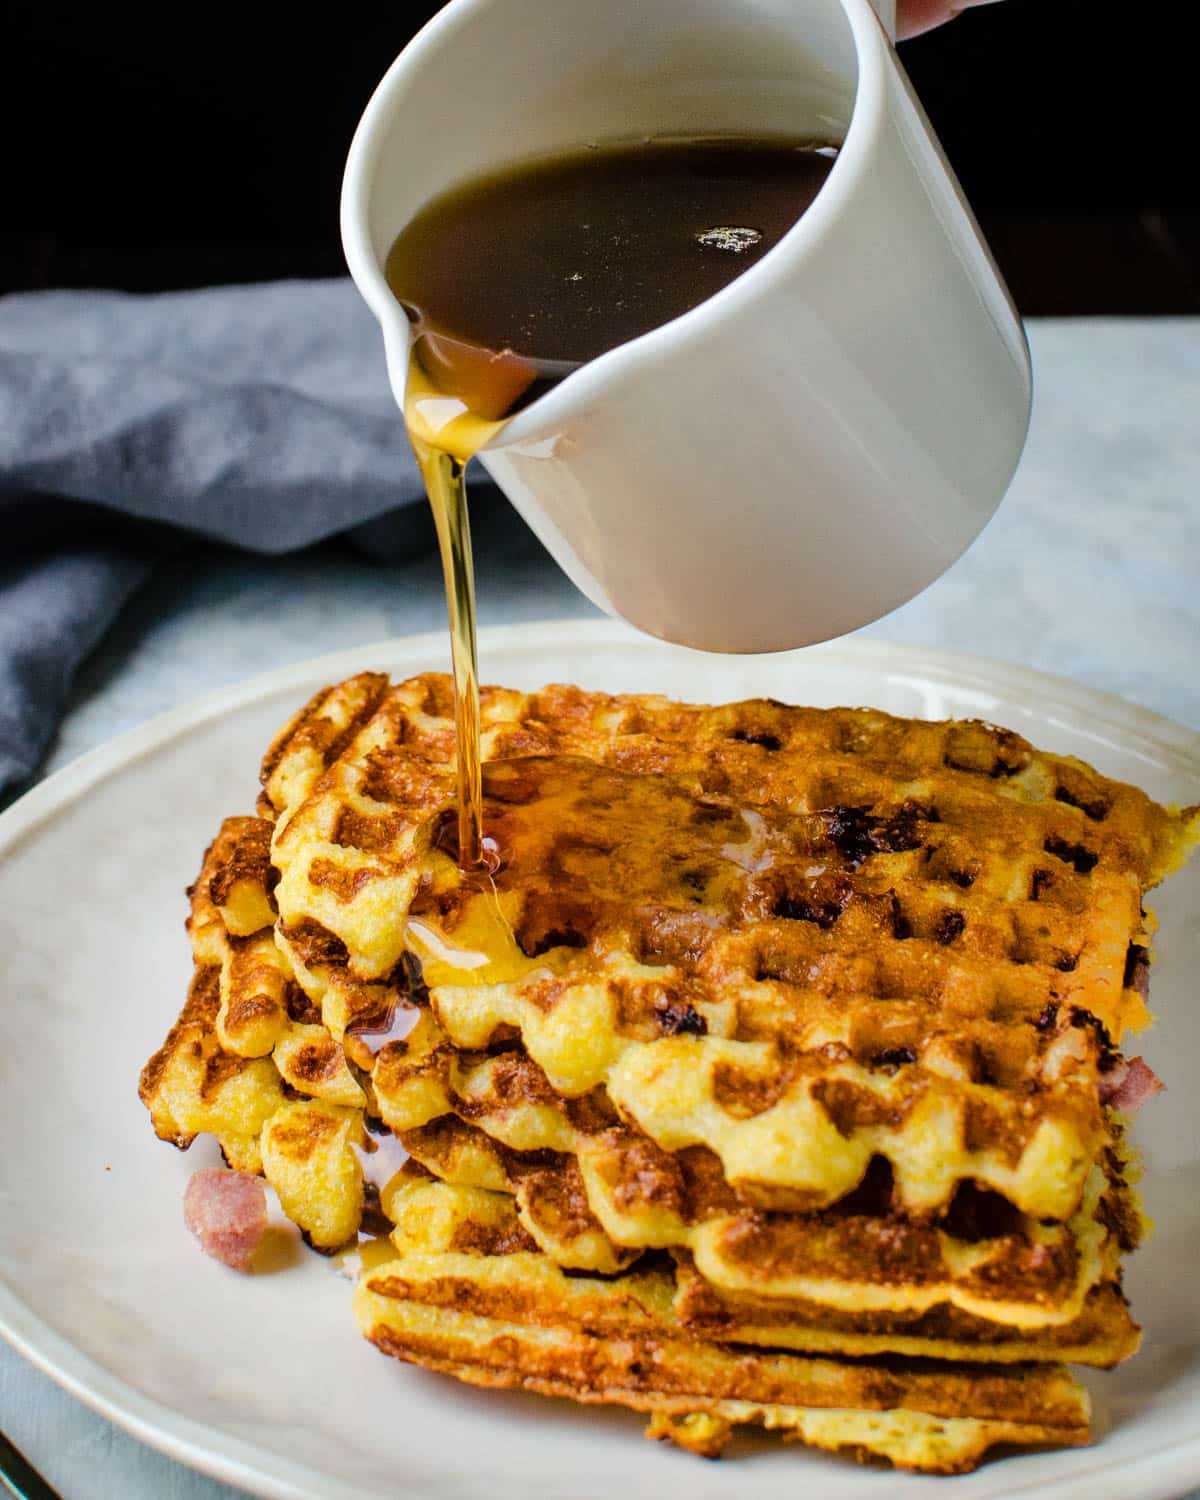 Pouring syrup on a stack of savory waffles.